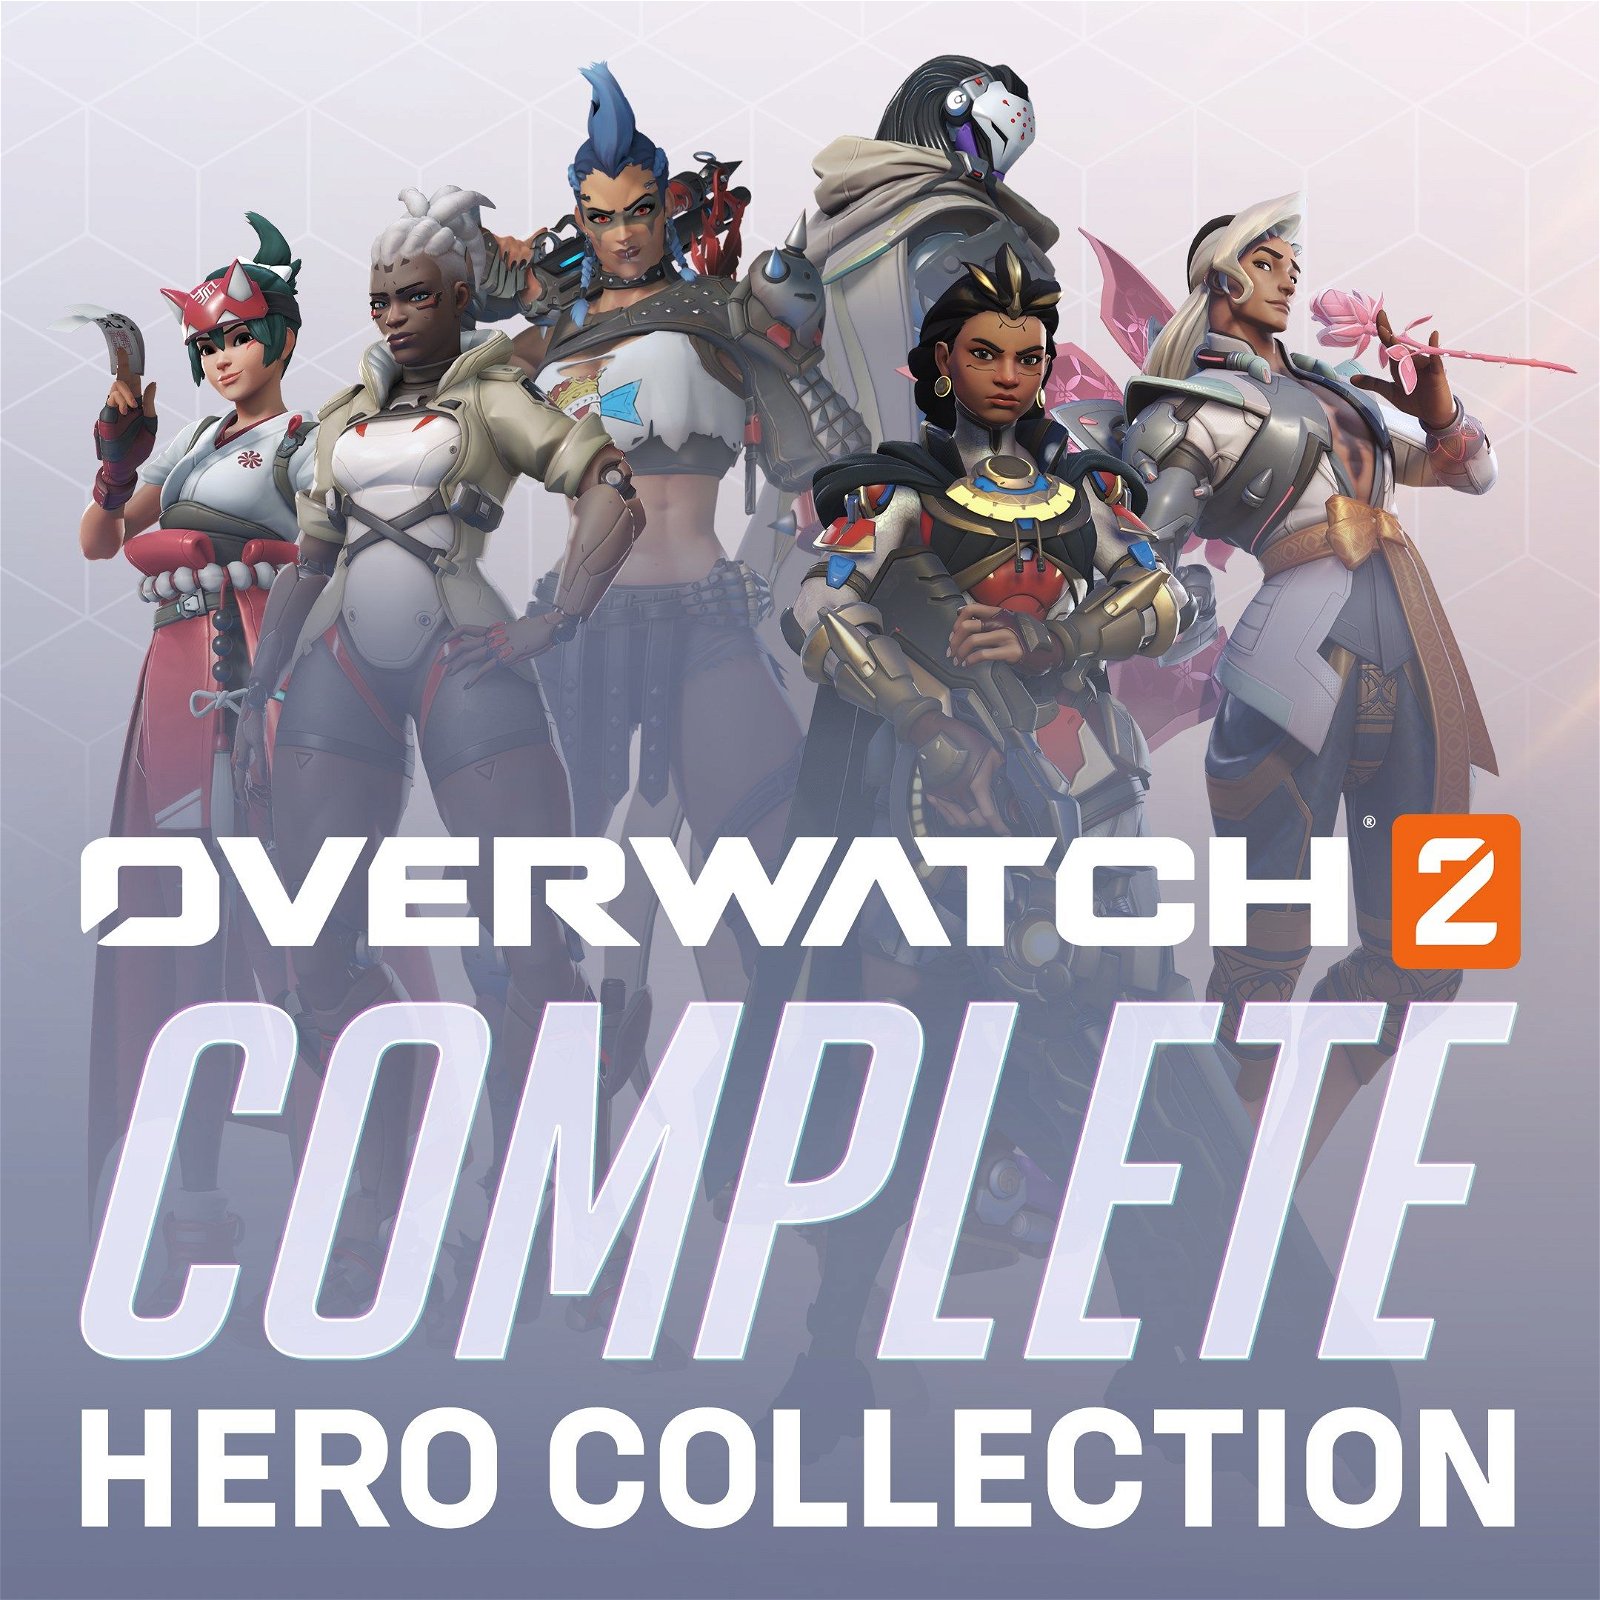 Image of Overwatch 2: Complete Hero Collection